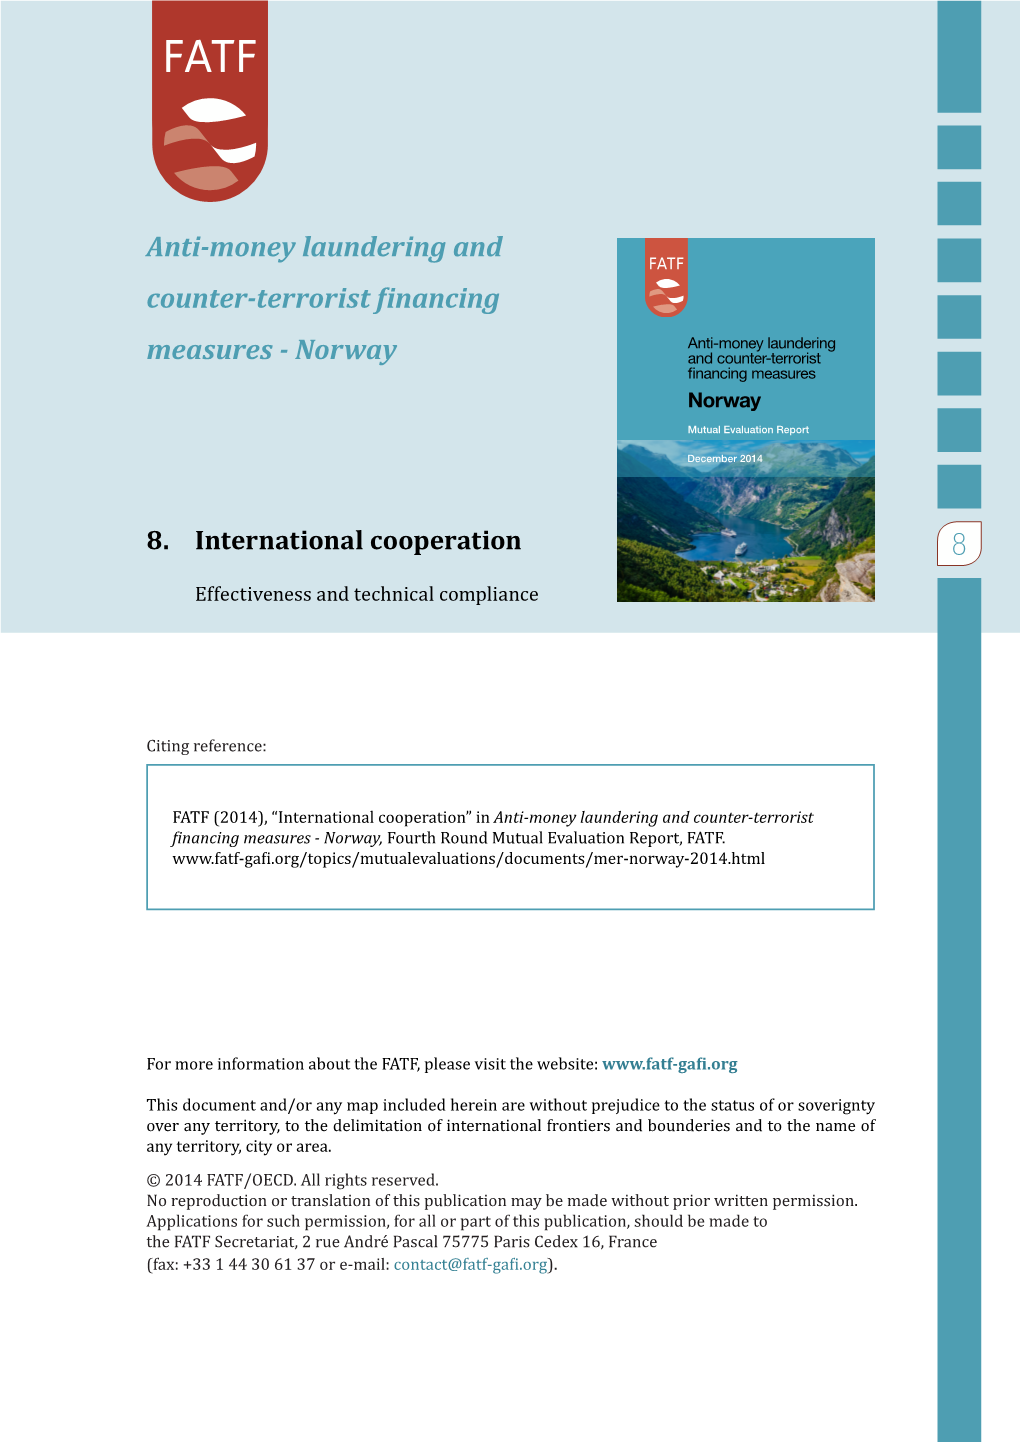 Anti-Money Laundering and Counter-Terrorist Financing Measures - Norway, Fourth Round Mutual Evaluation Report, FATF